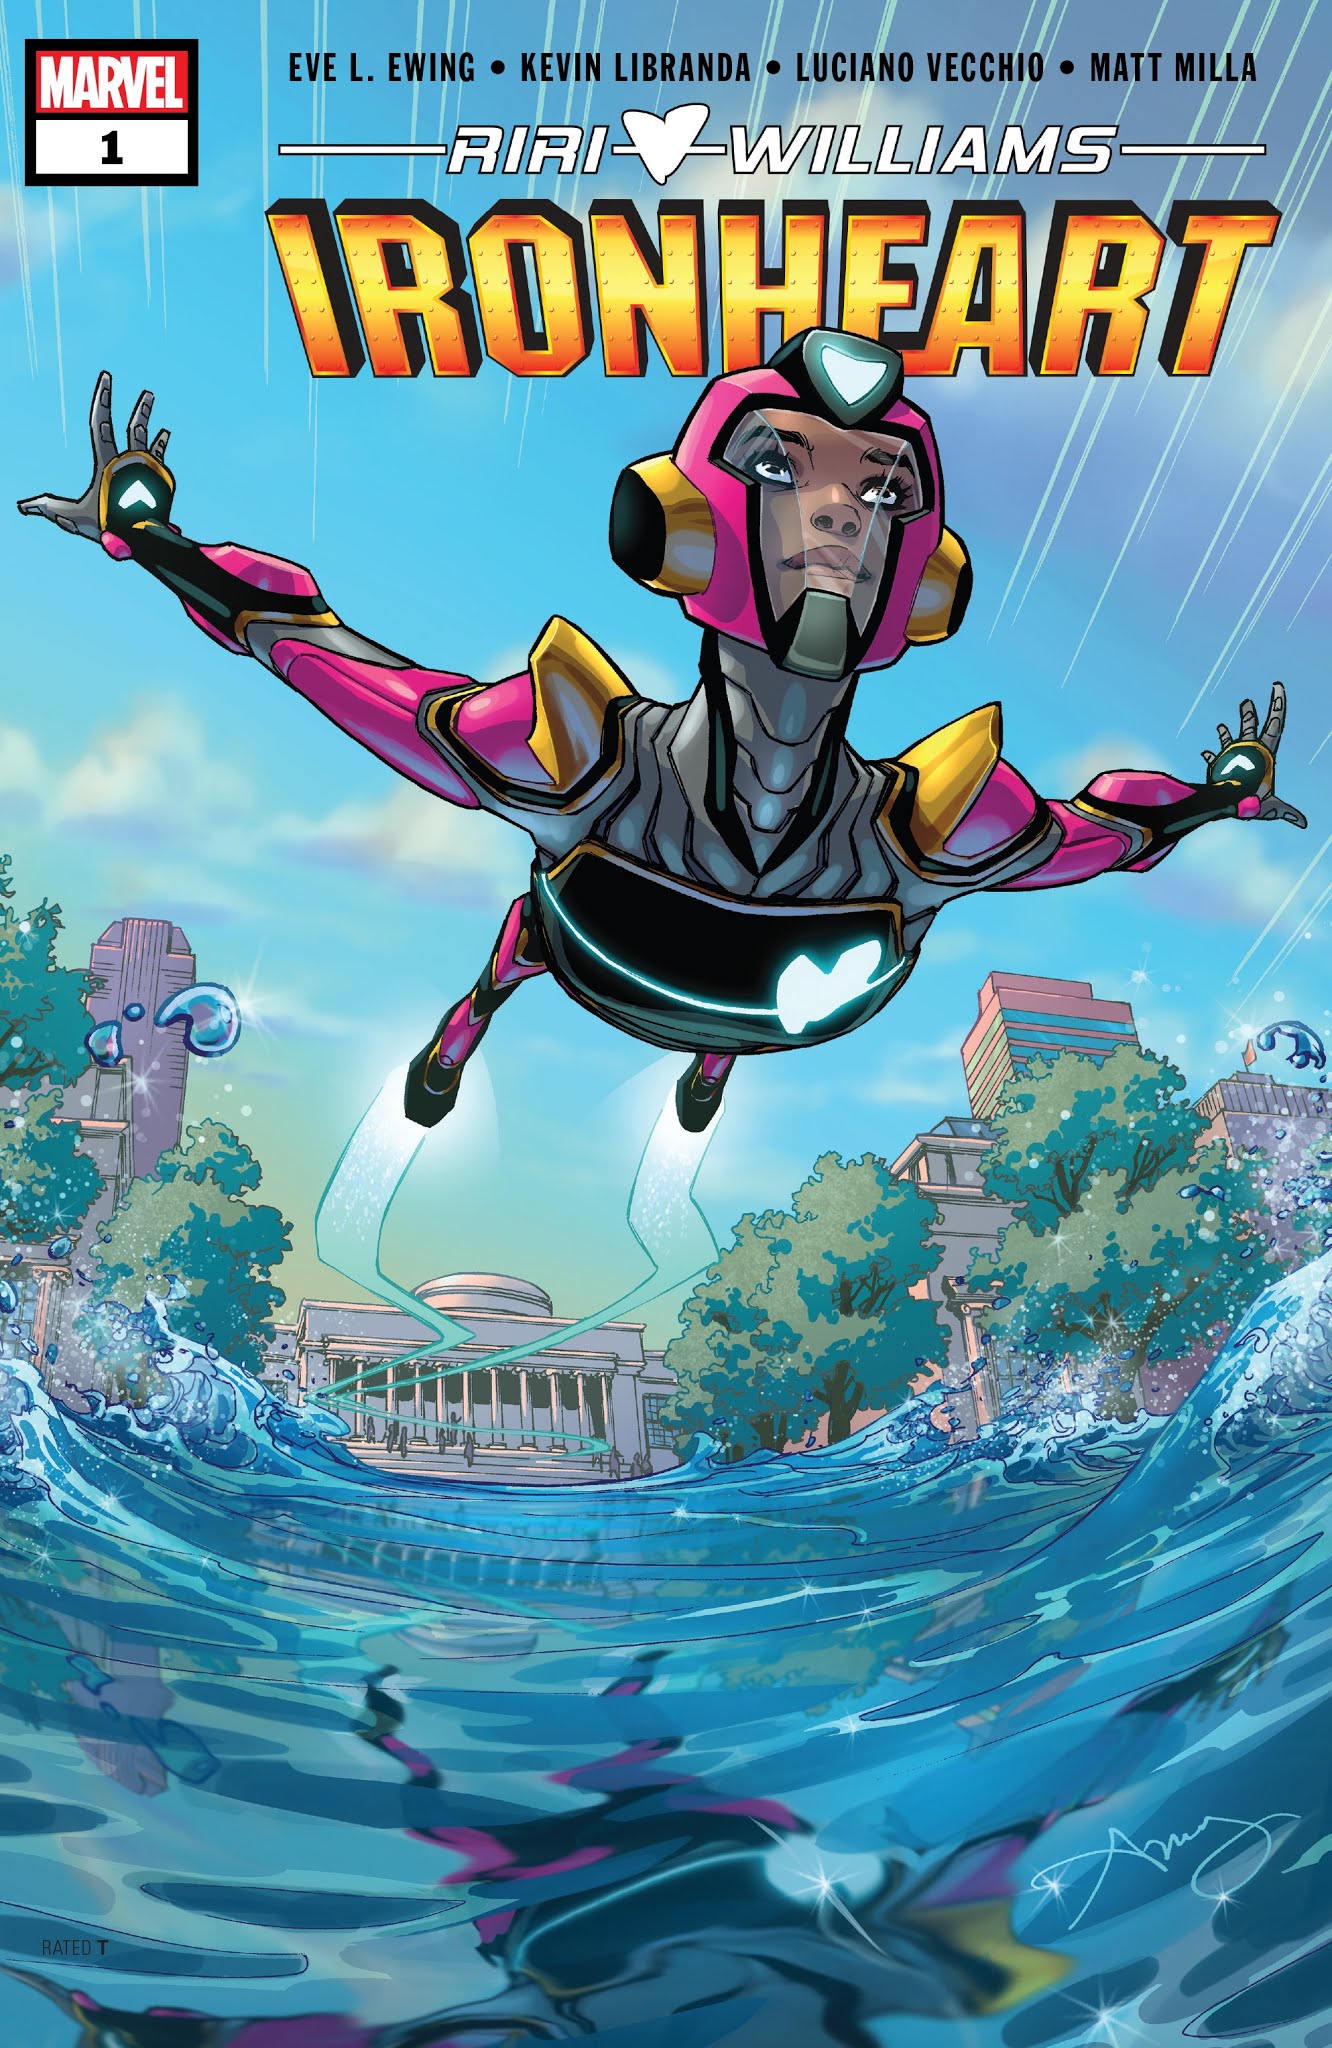 Read online Ironheart comic -  Issue #1 - 1